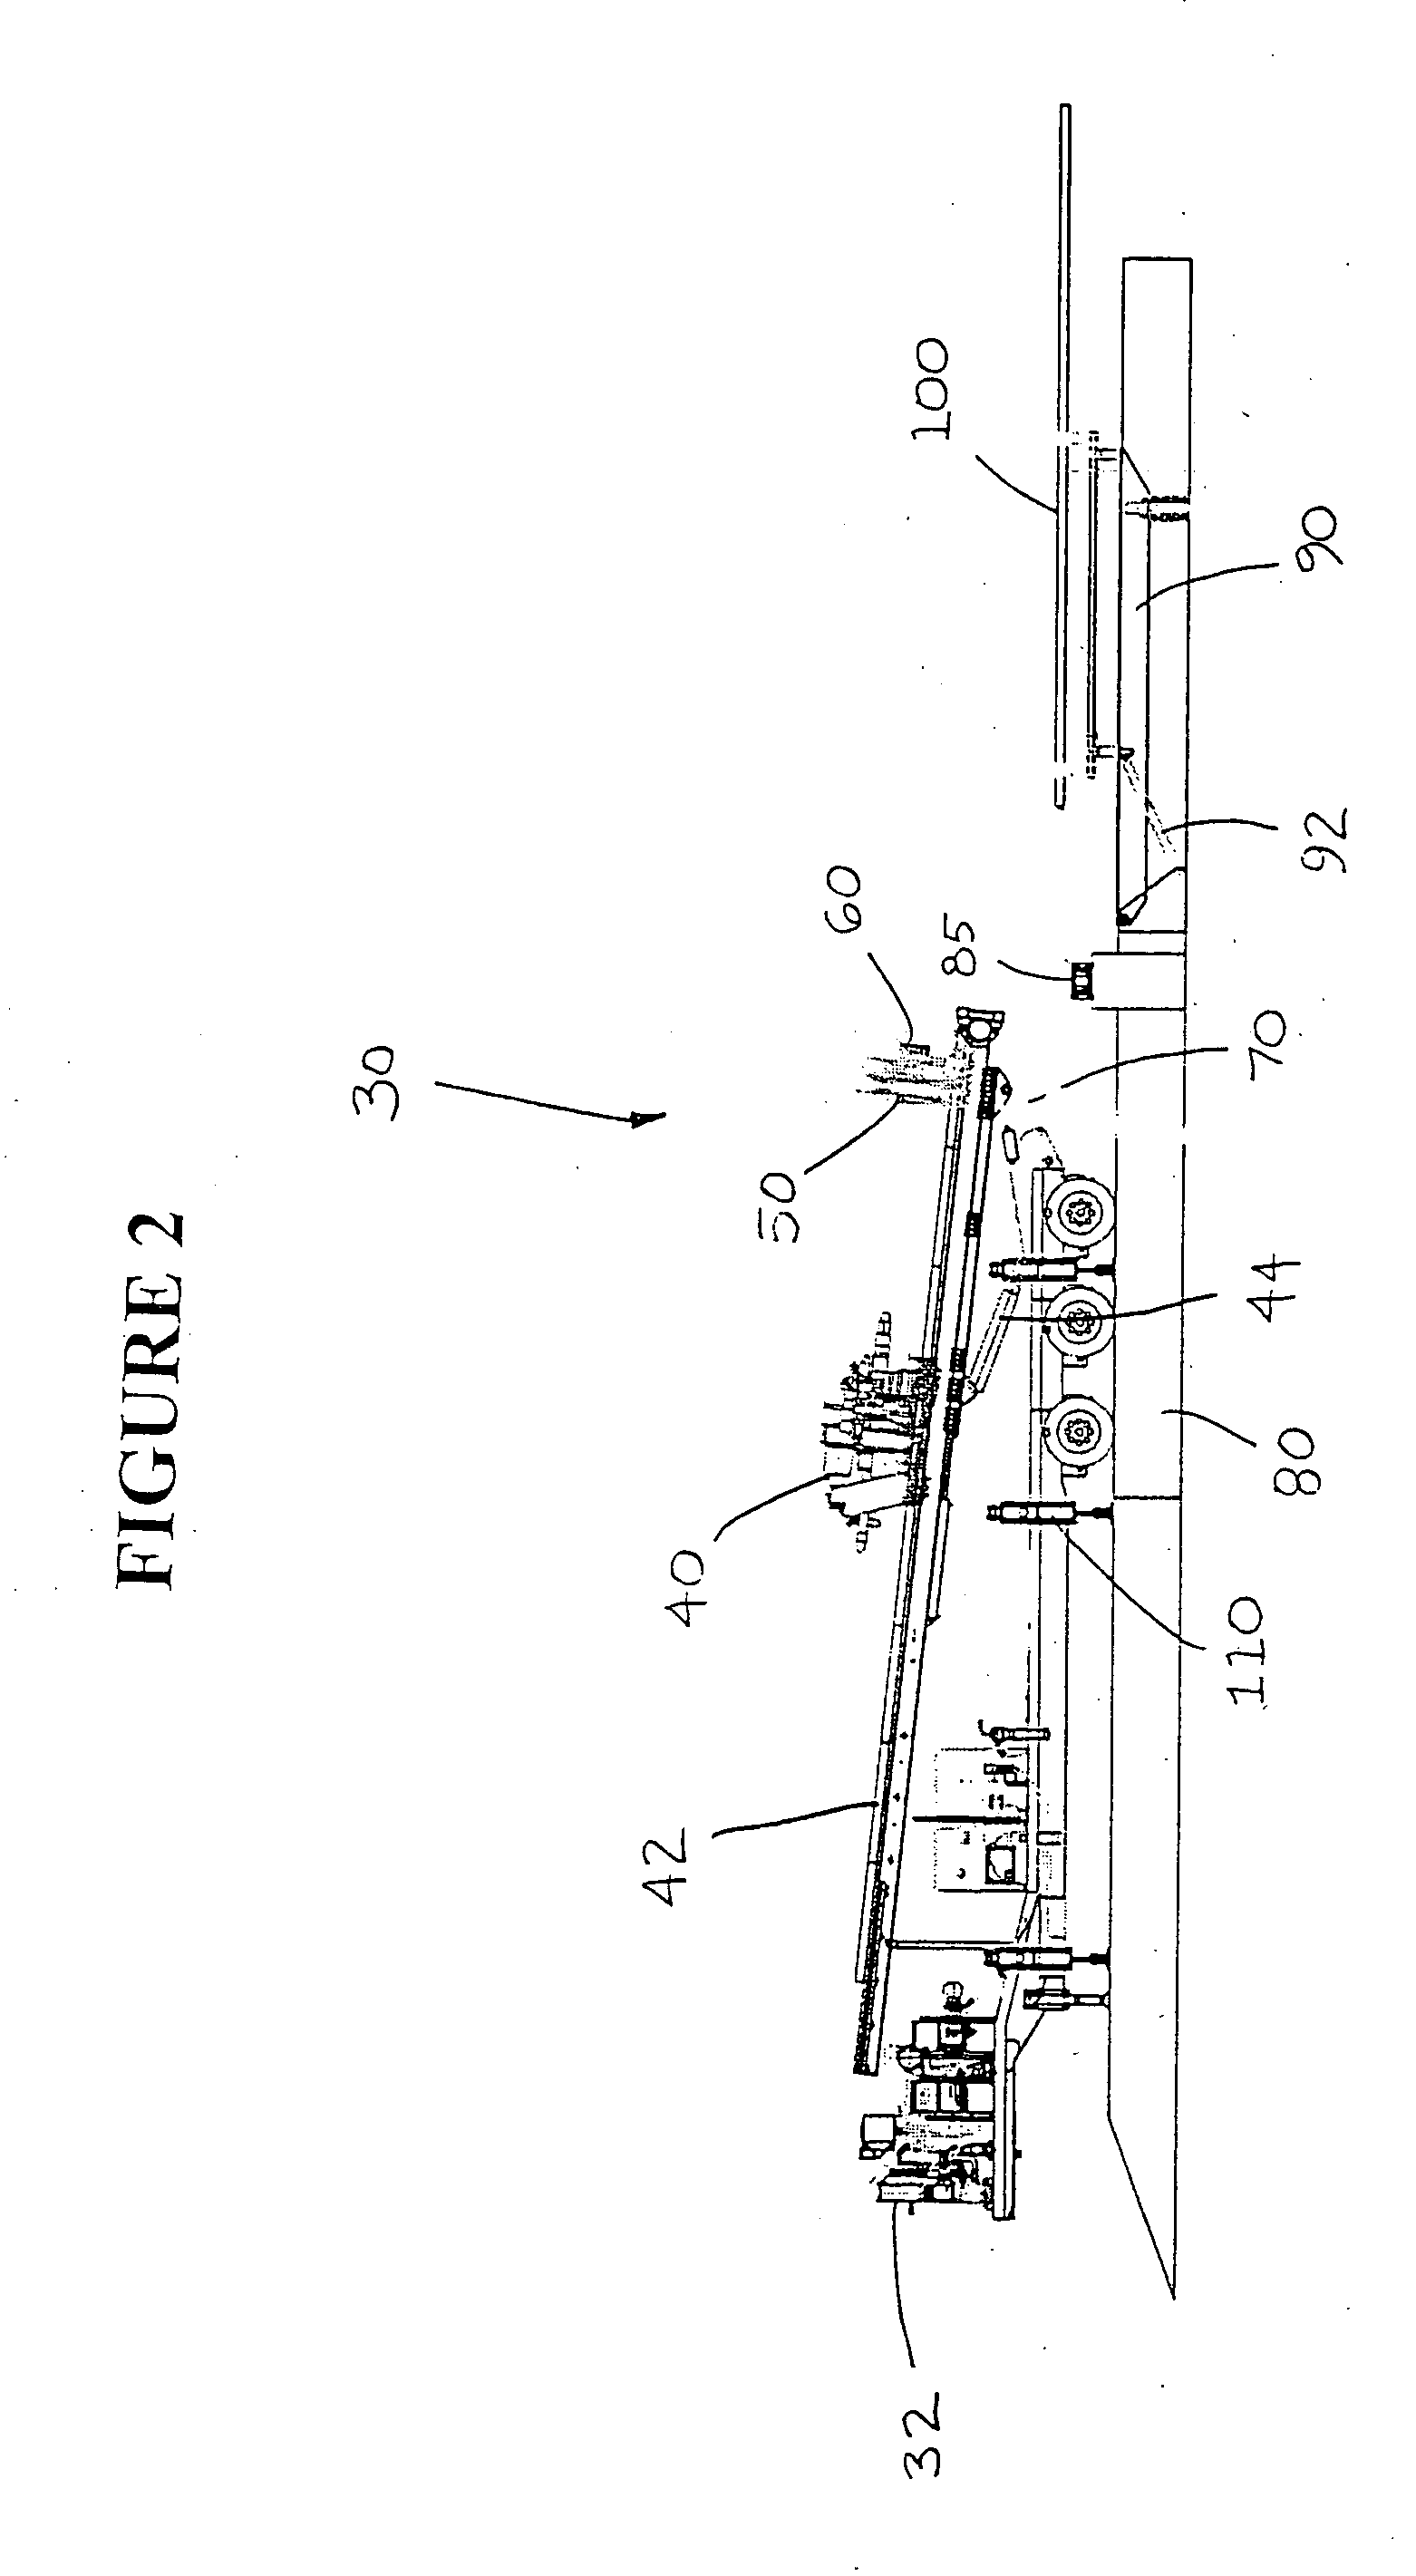 Apparatus and method for modified horizontal directional drilling assembly